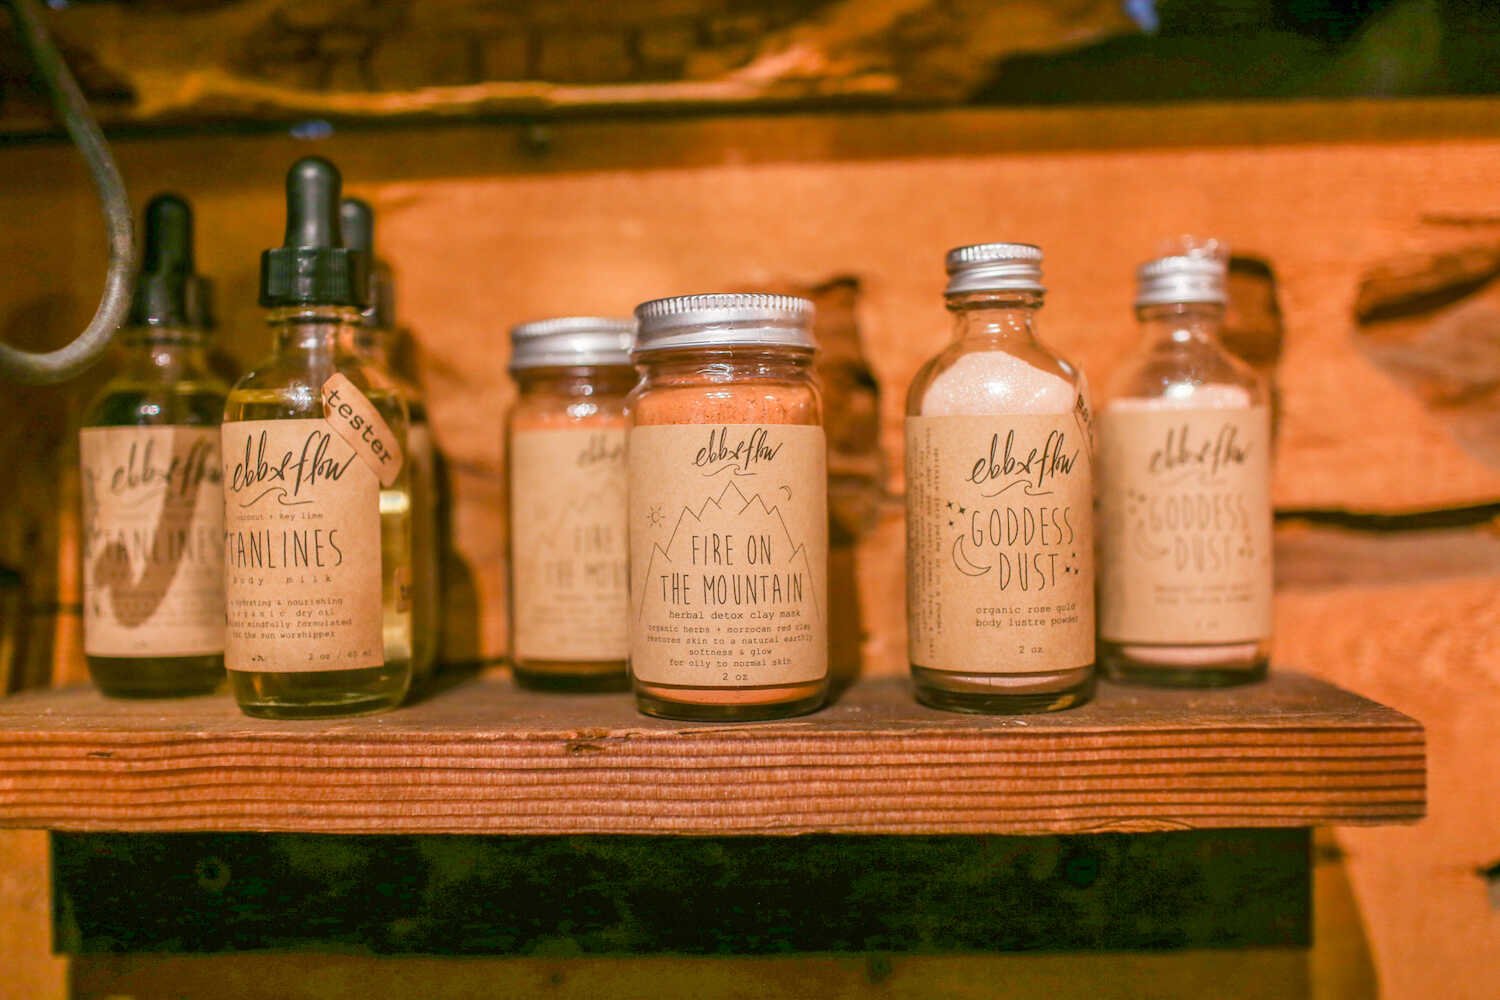 The Complete Travel Guide to Julian, California - Locally made artisan bath, beauty and wellness products inside The Warm Hearth of Julian boutique store.